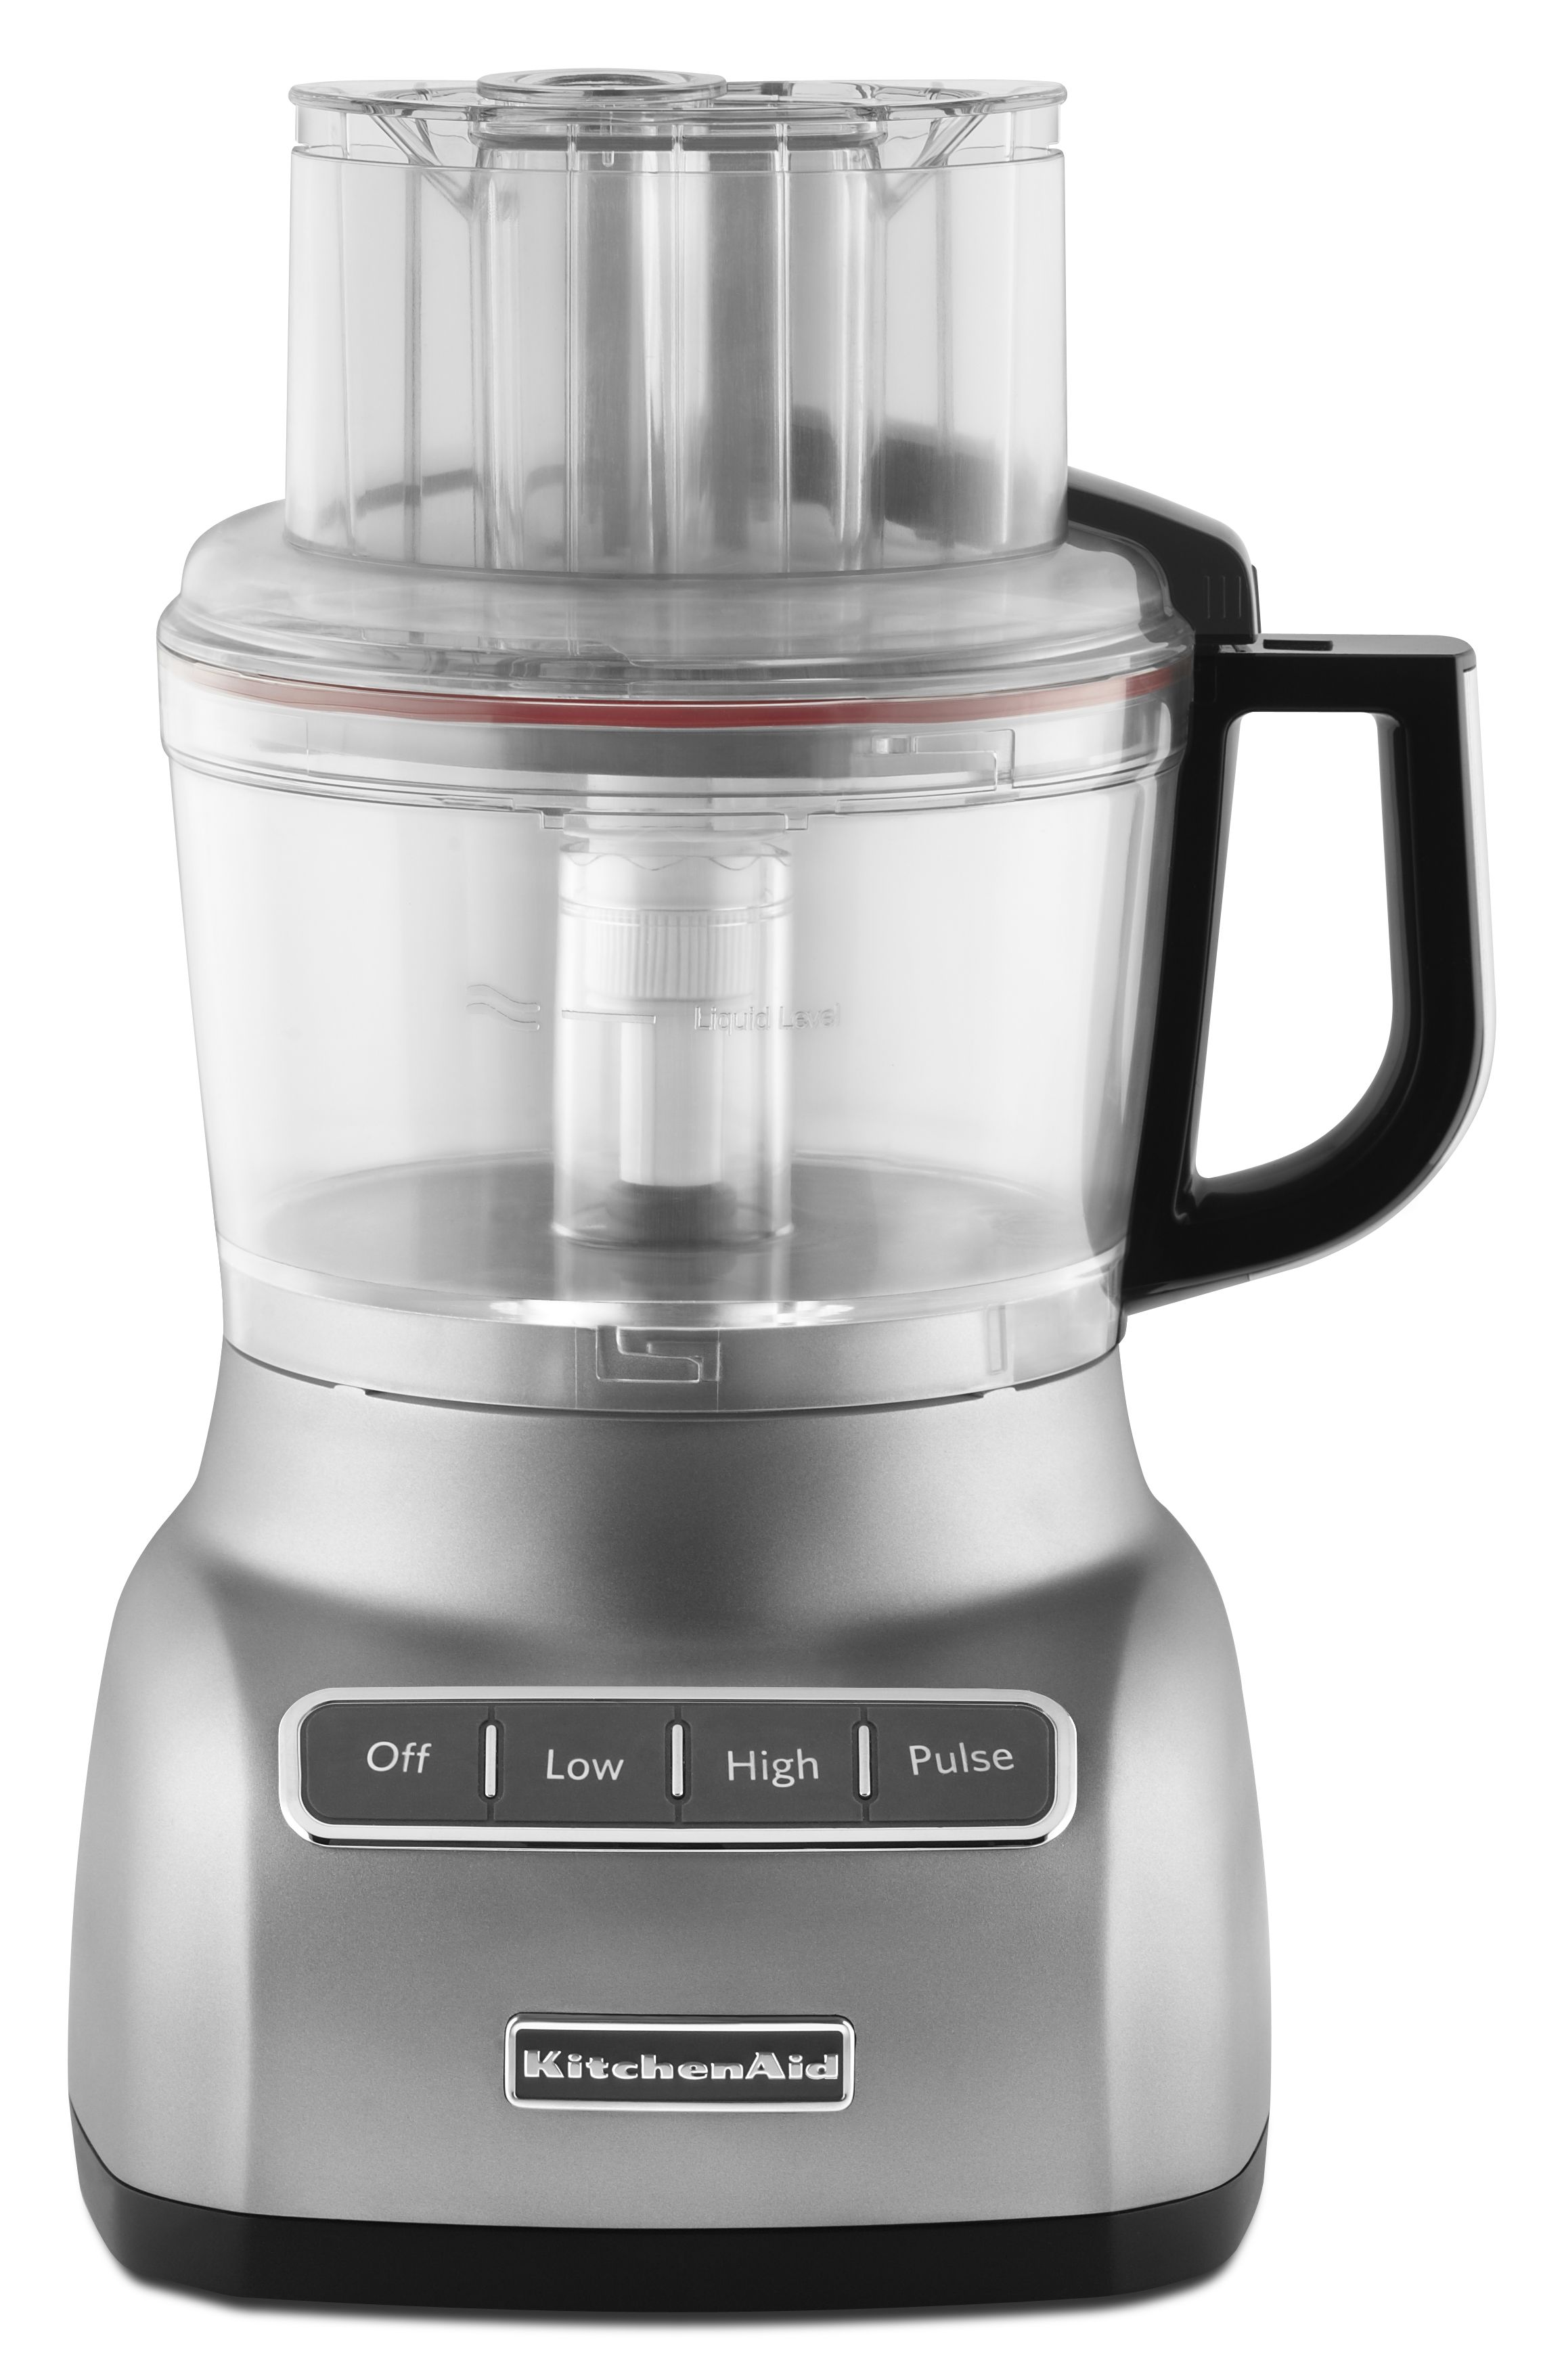 KitchenAid KFP0922CU  9 Cup Food Processor with ExactSlice System in Silver